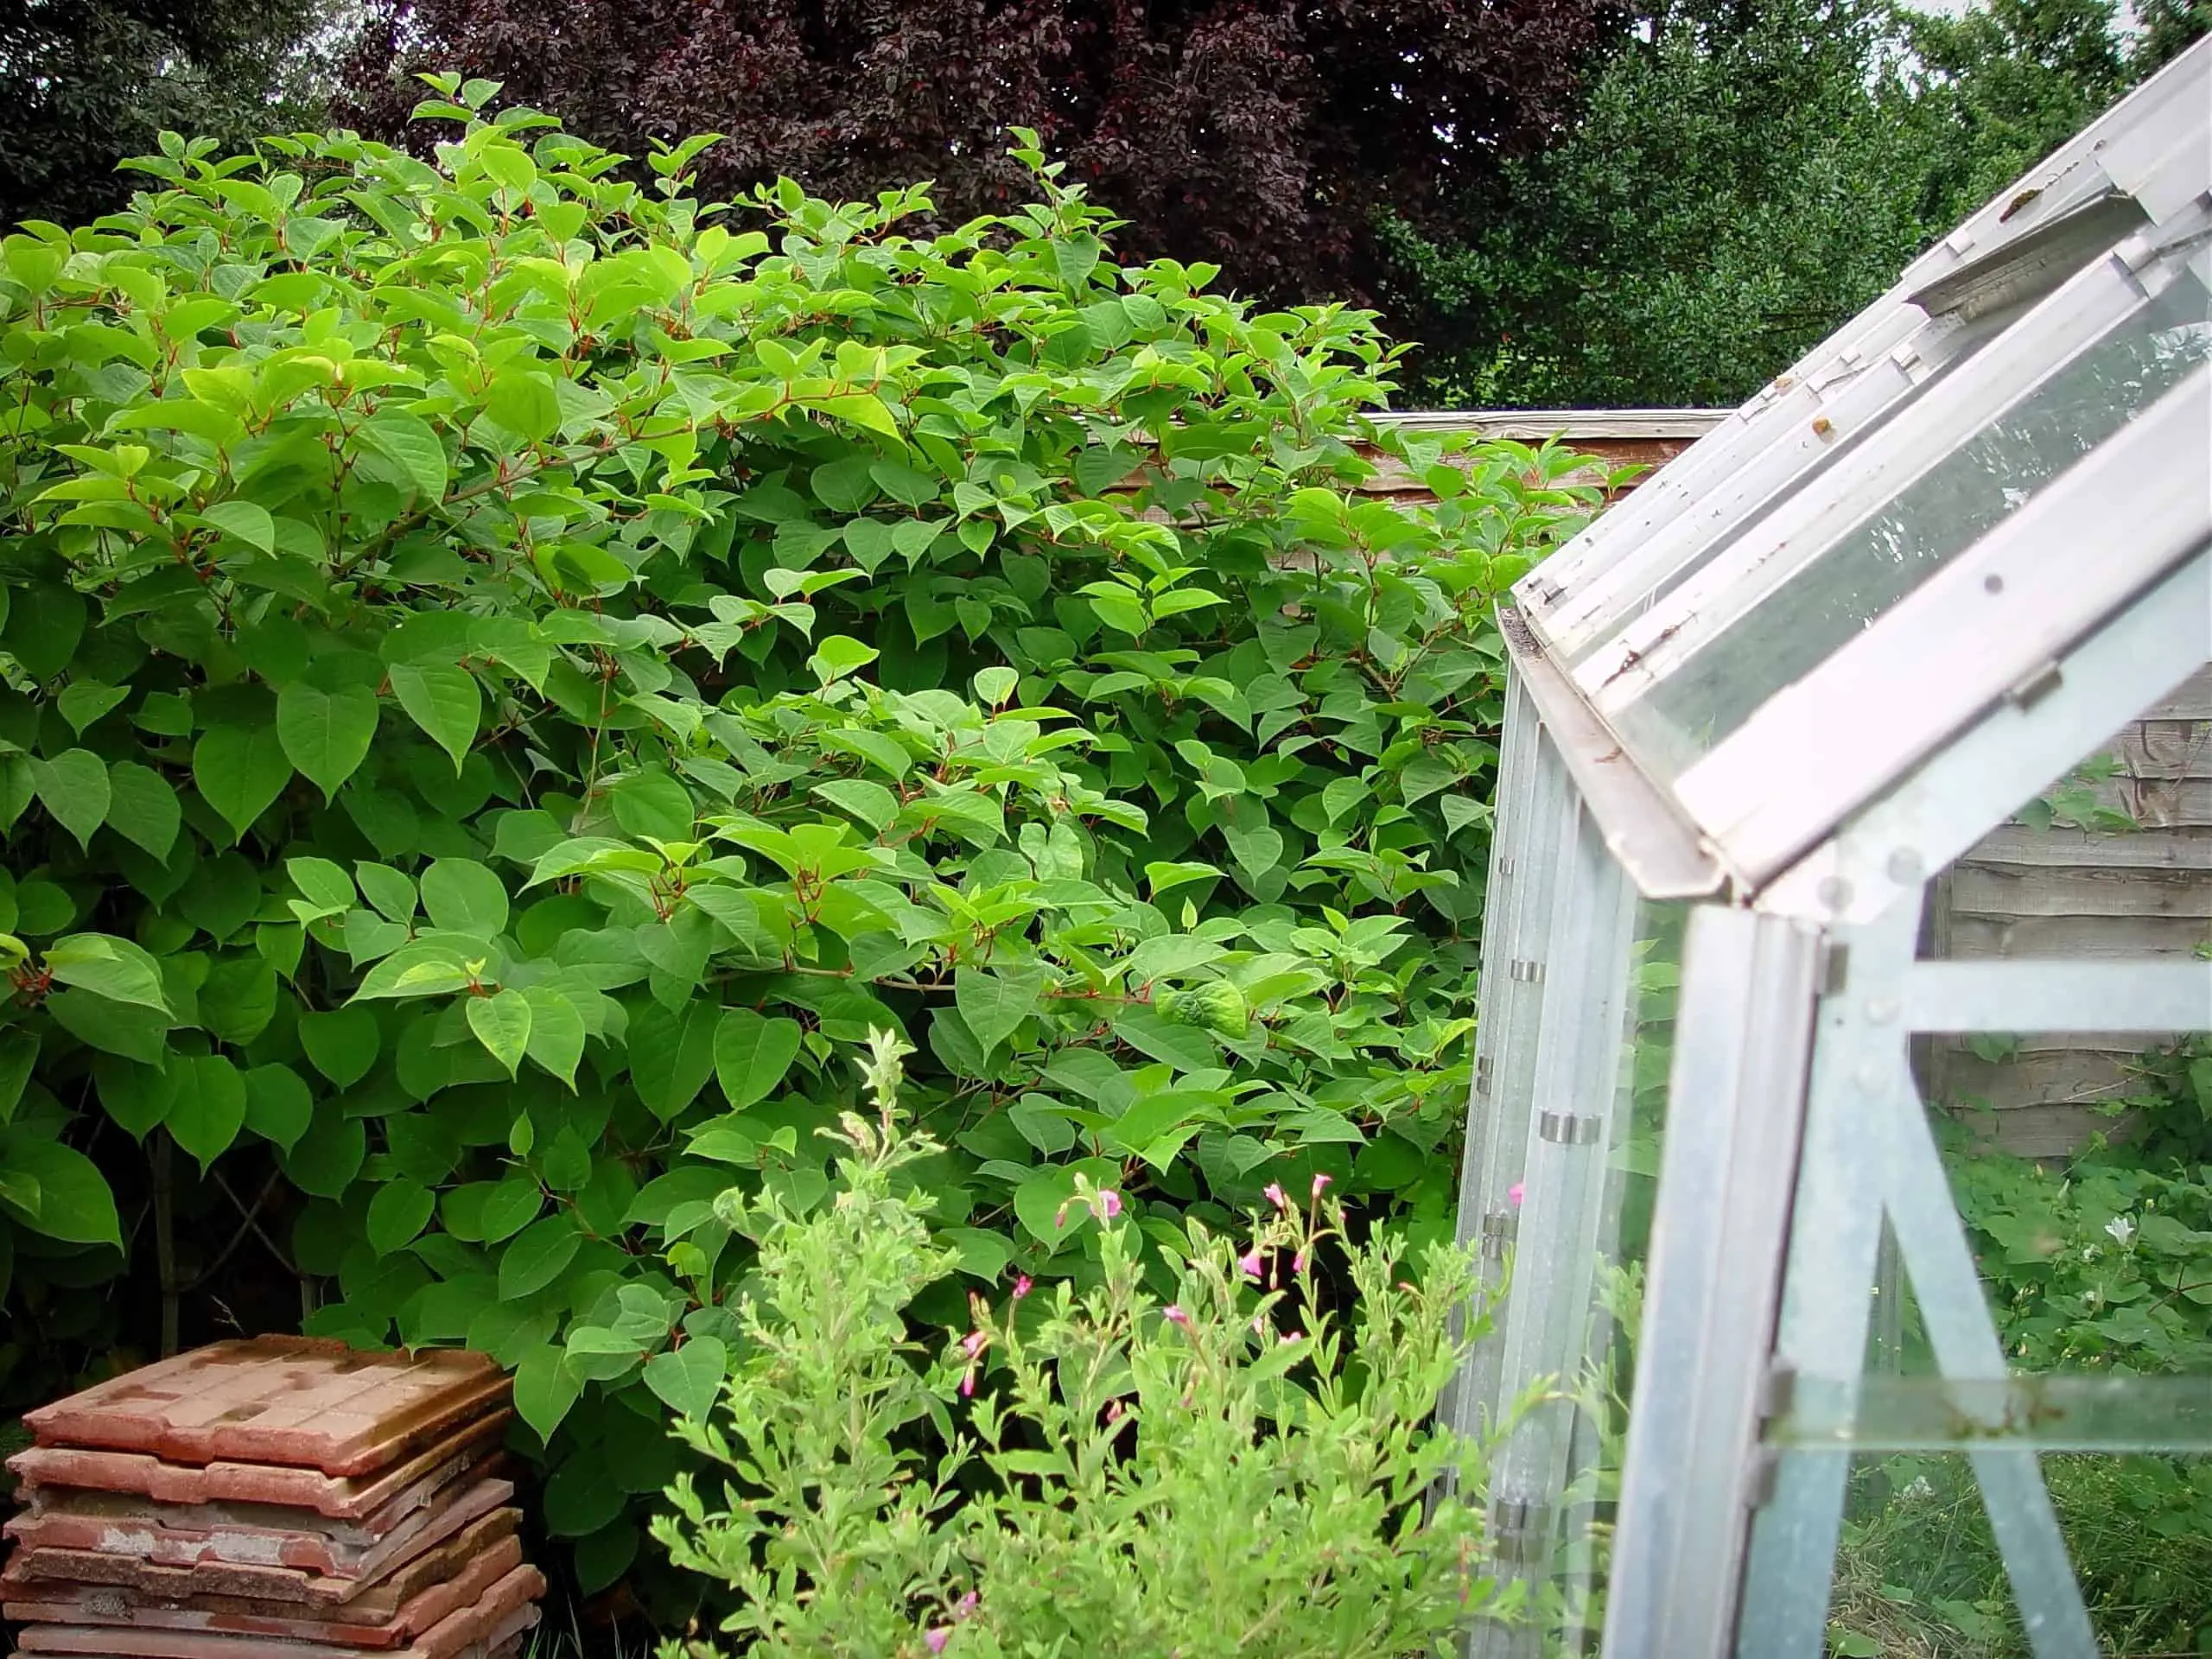 Knowing how much Japanese knotweed can devalue your house is key to retaining value in your property